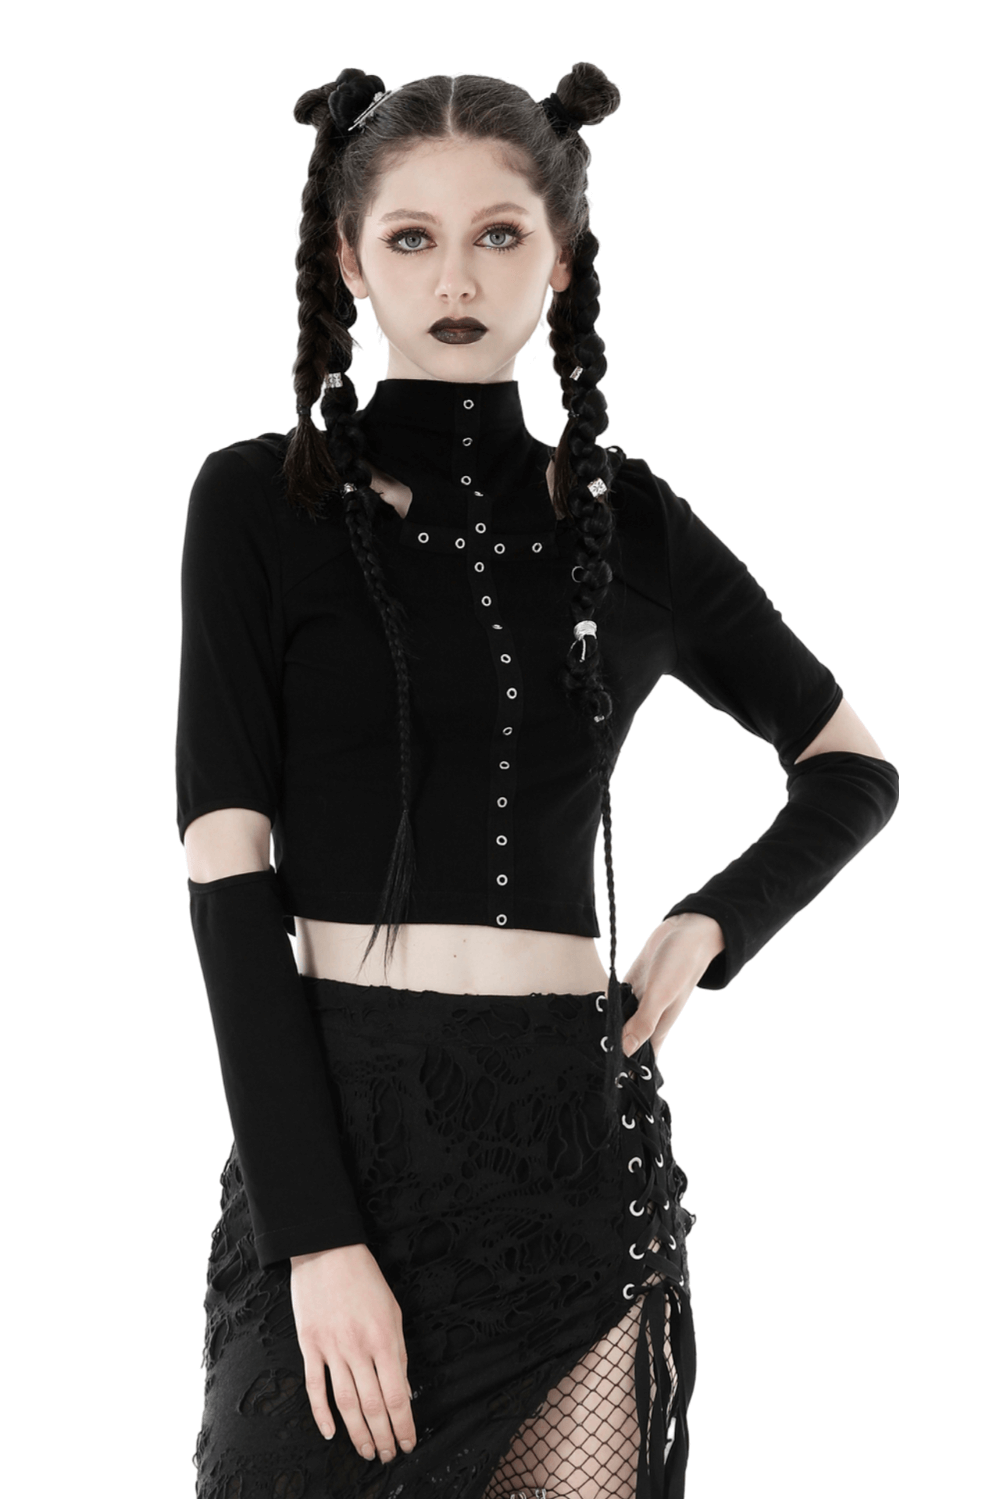 Gothic Long Sleeves Black Crop Top with Eyelets and Hood